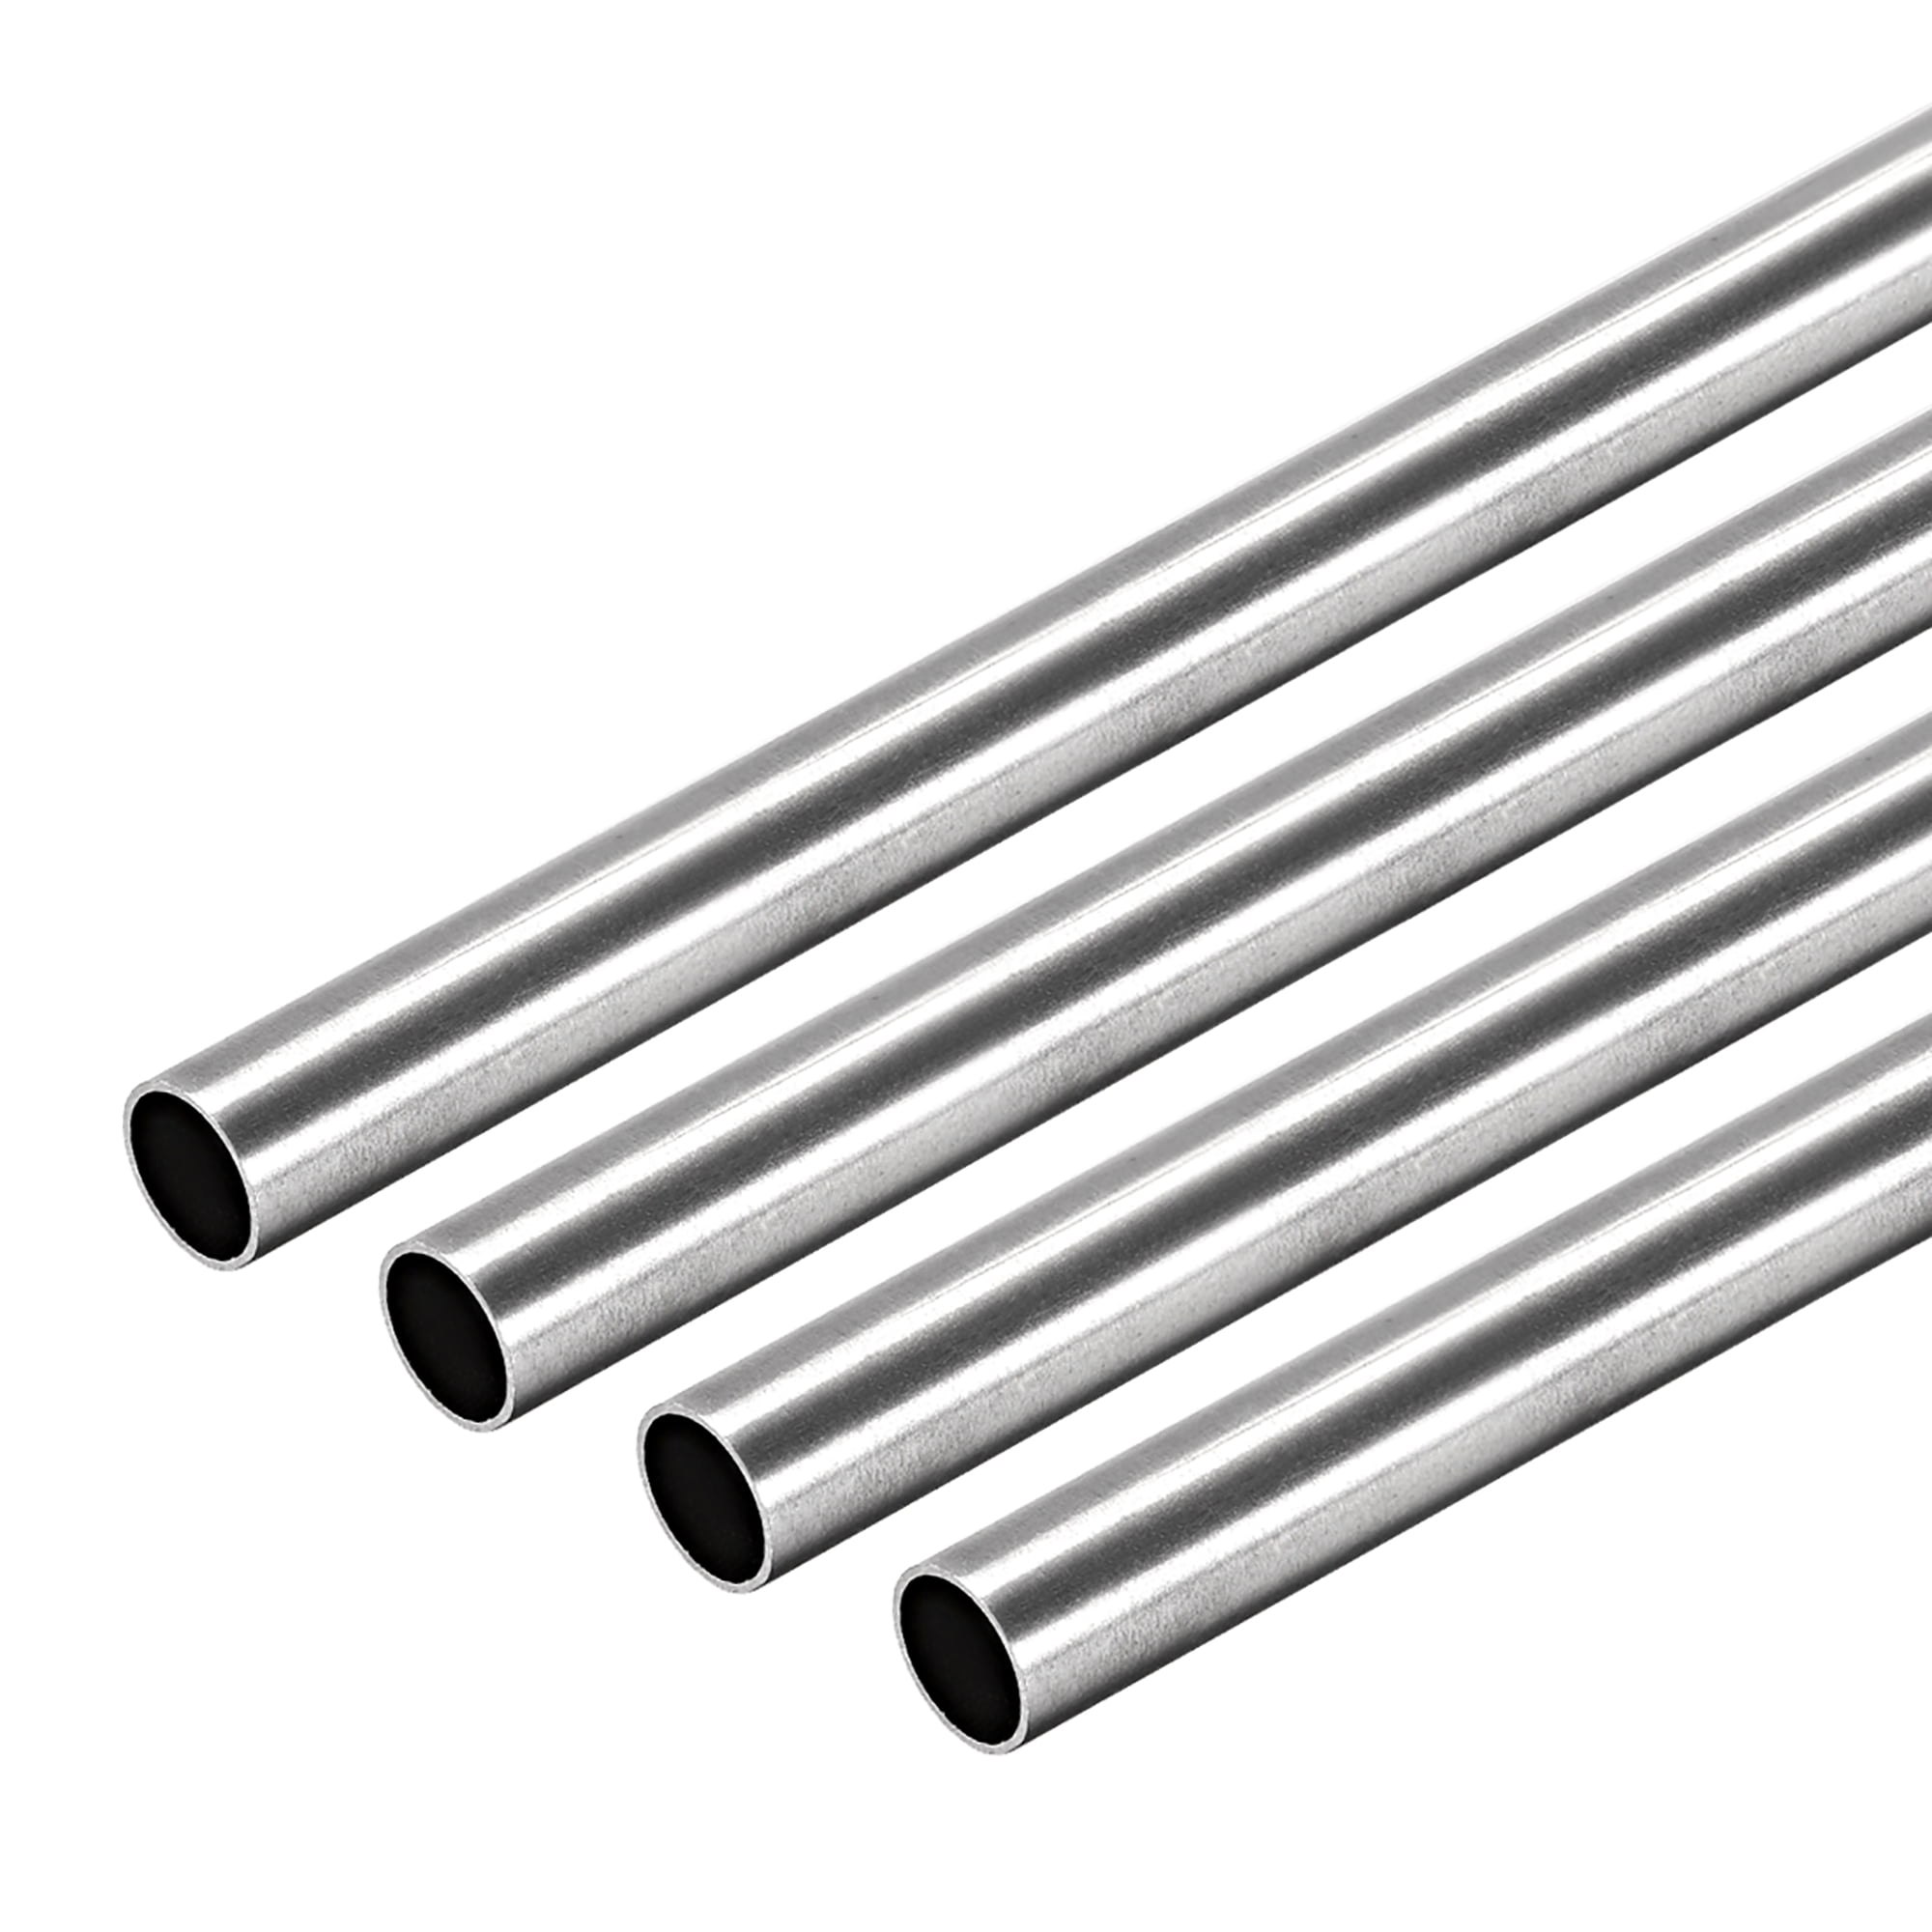 304 Stainless Steel Round Tubing 250mm Length 7mm OD 0.4mm Wall 1.9 Od Stainless Steel Tubing